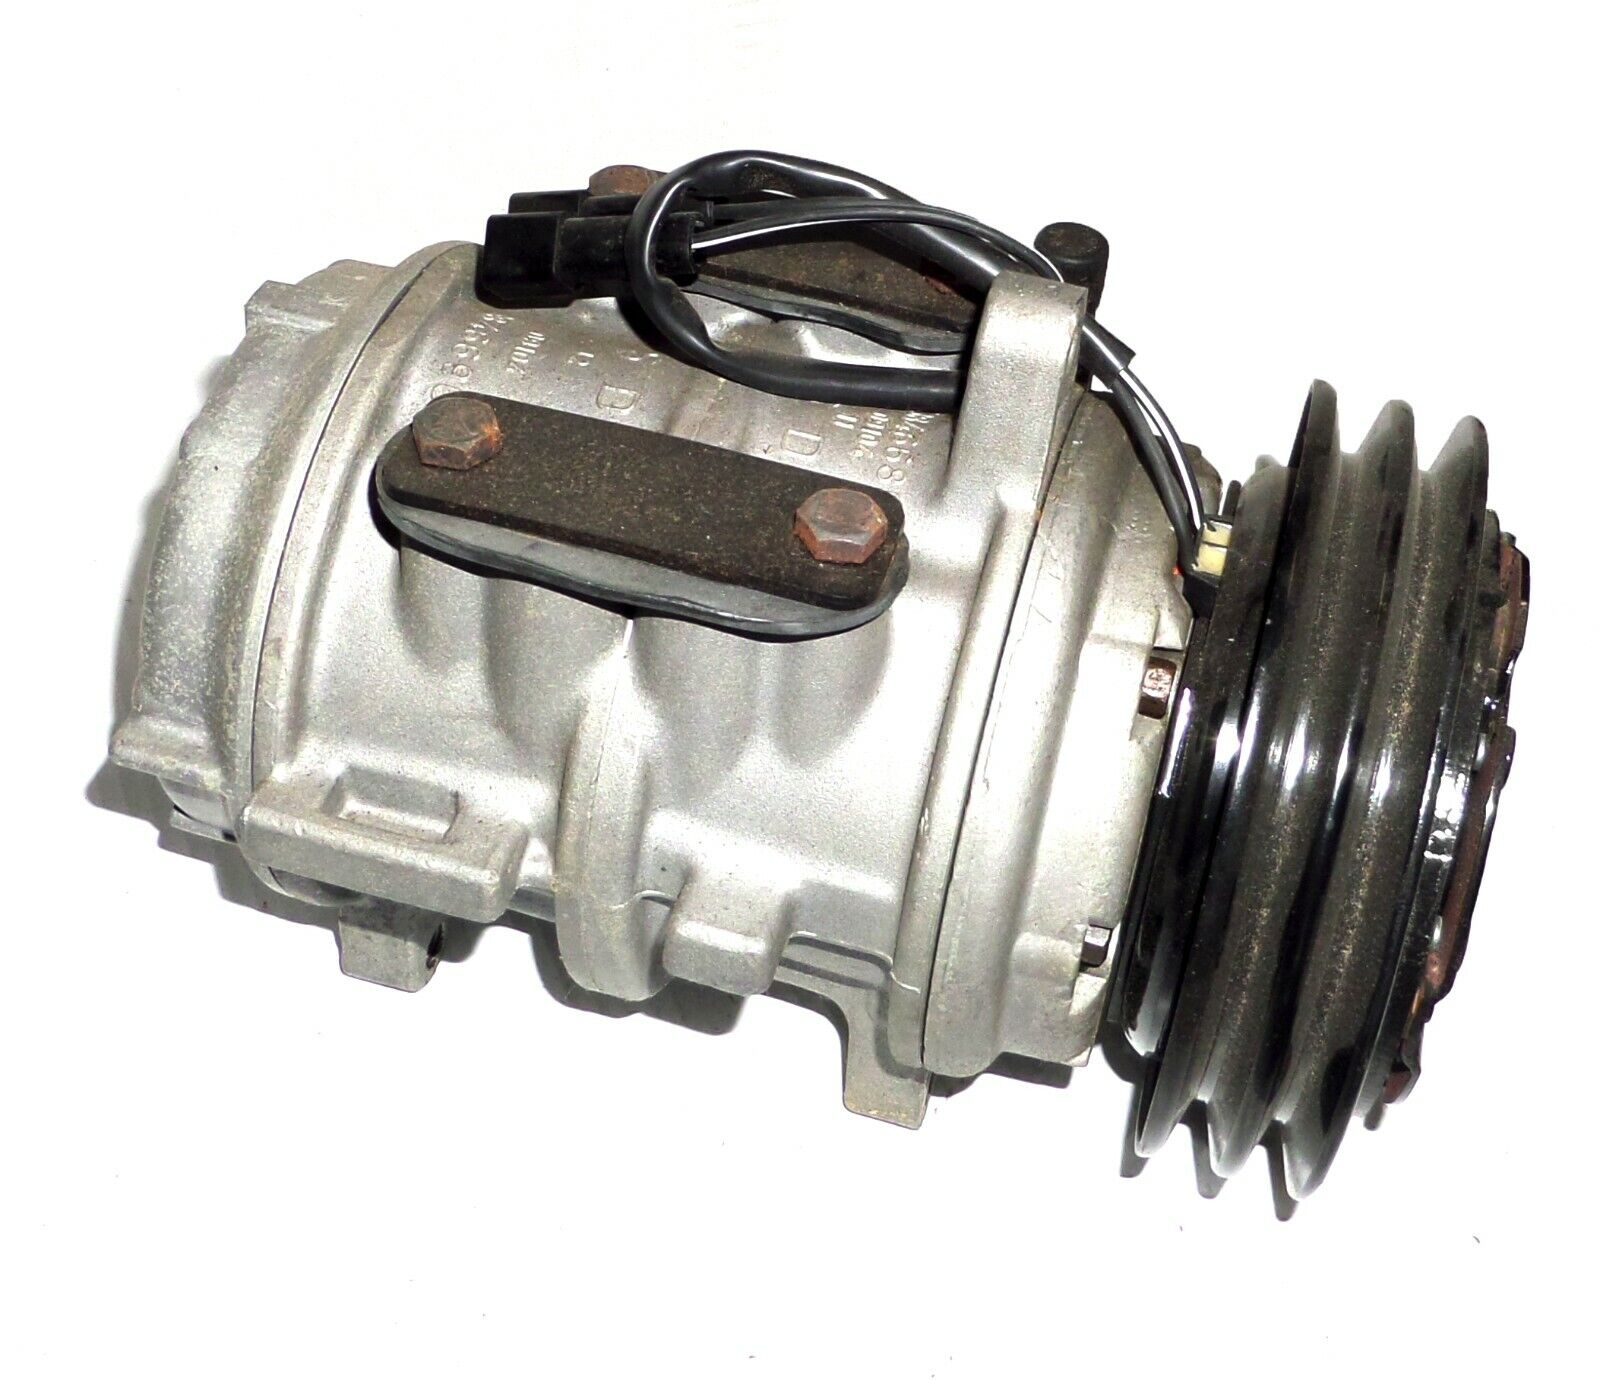 15-20326 AC Compressor with Clutch Aries Lebaron Town n Country 400 600 Reliant